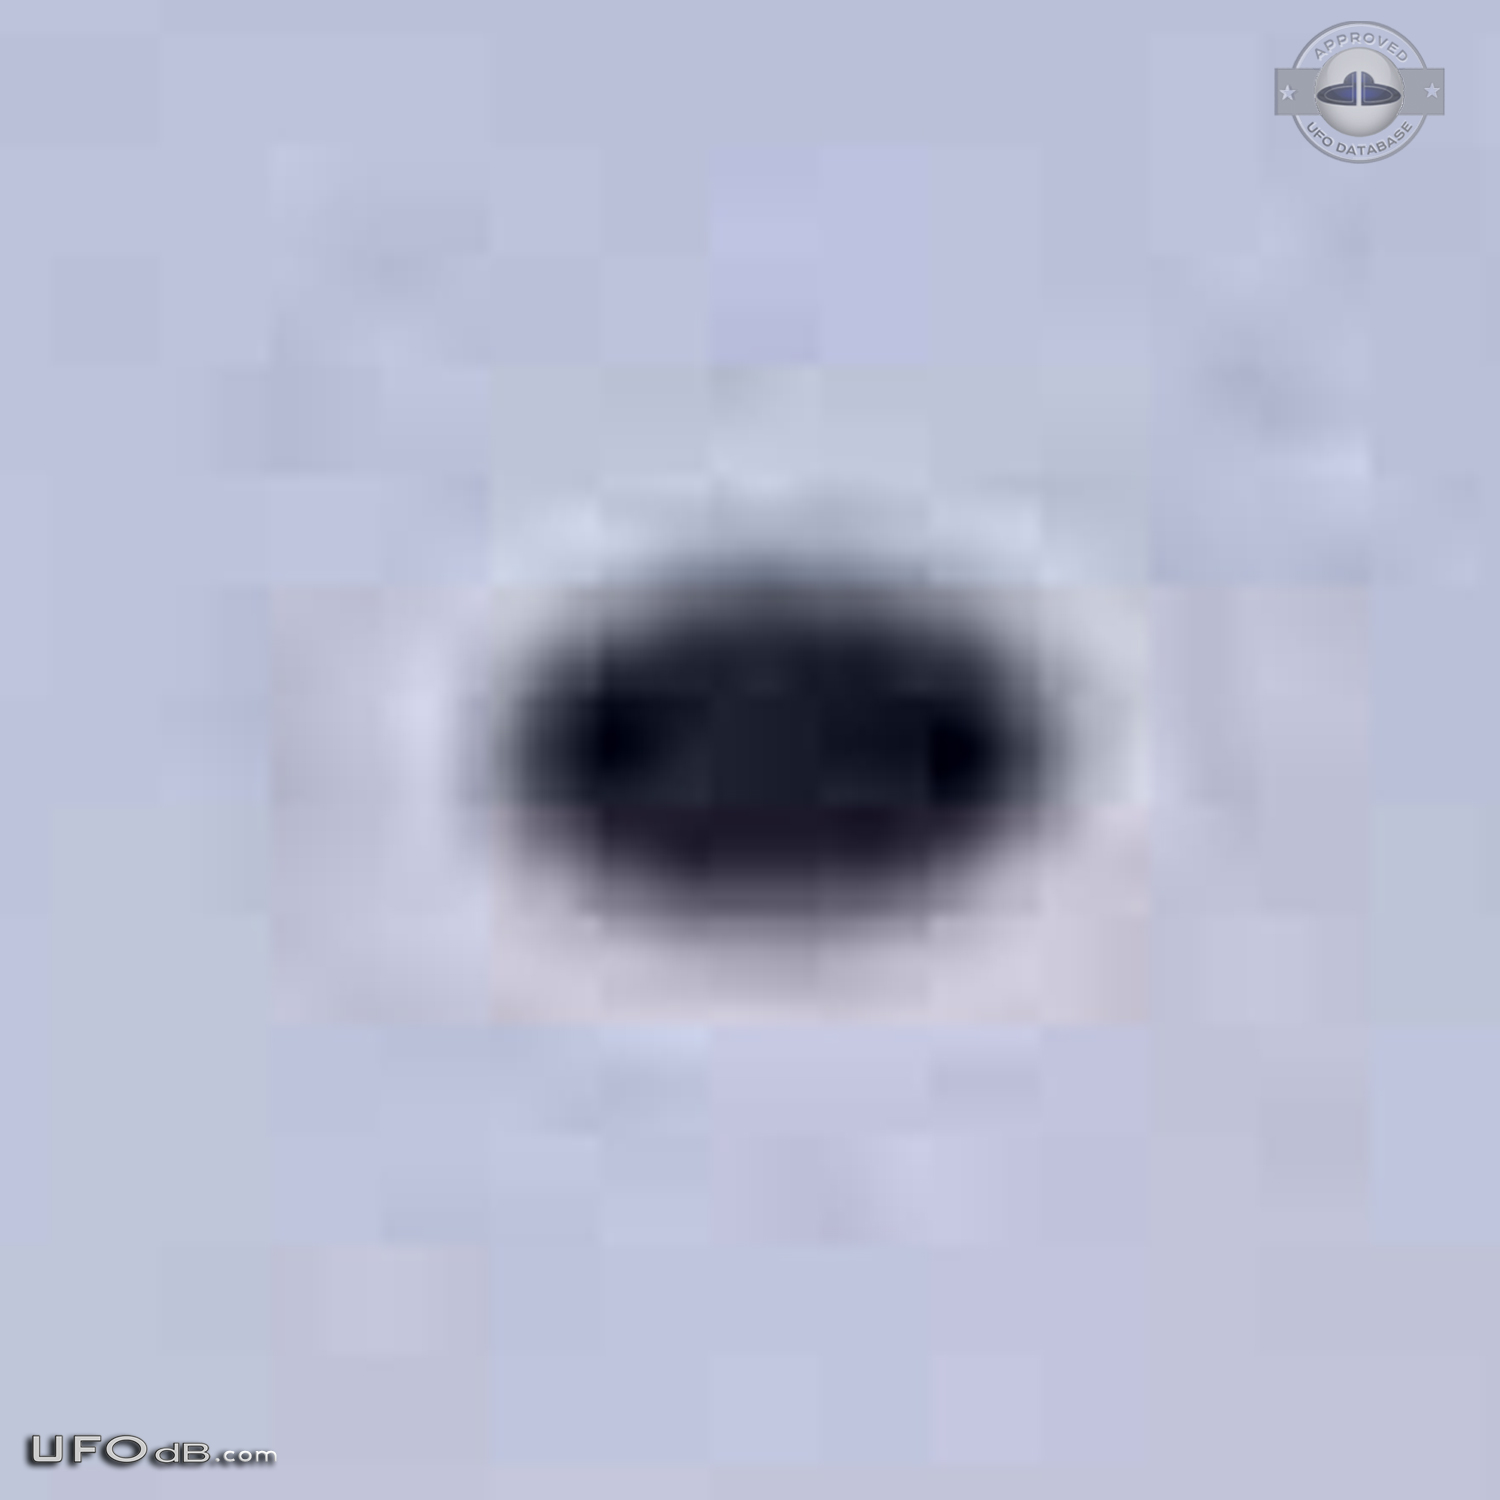 Poland 2003 Ufo sighting get aircrafts dispatched to check out the ufo UFO Picture #379-9